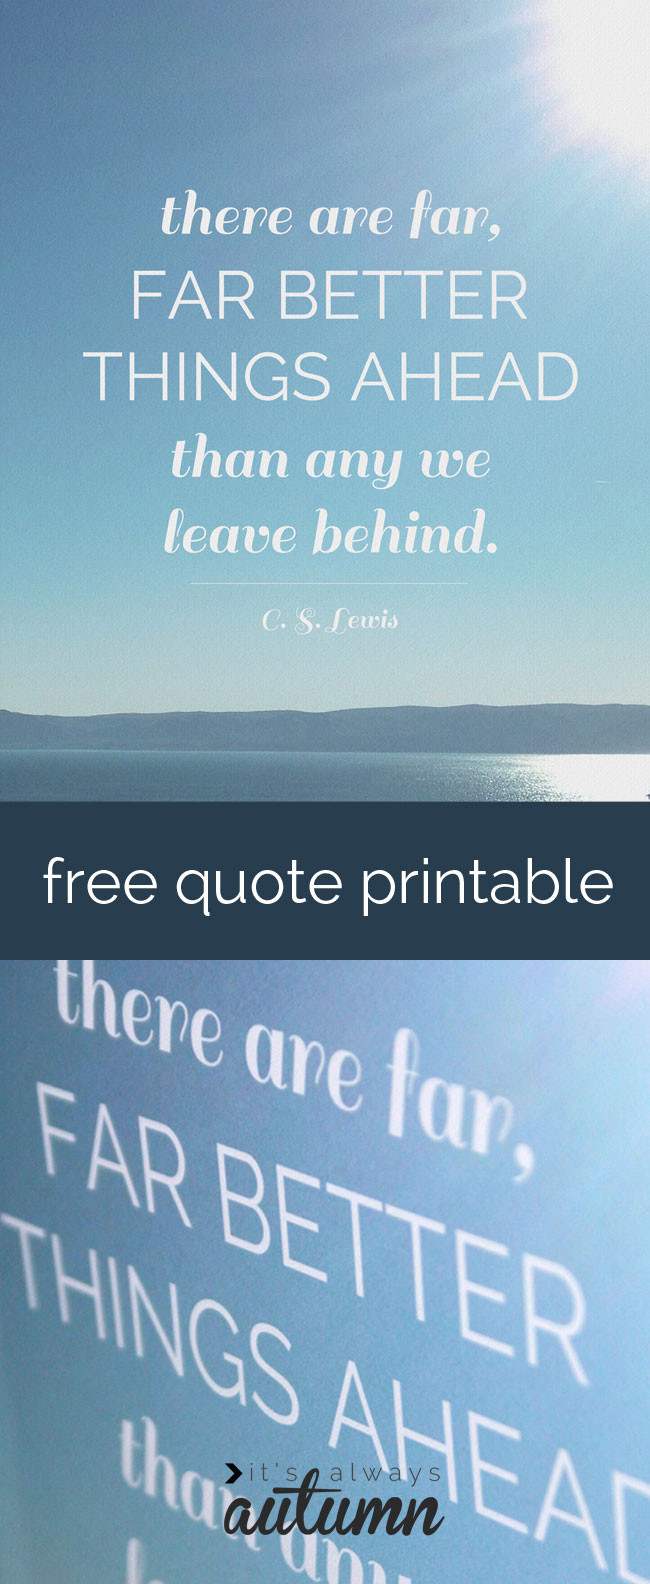 Cs Lewis Quotes On Life
 free C S Lewis quote printable far better things ahead